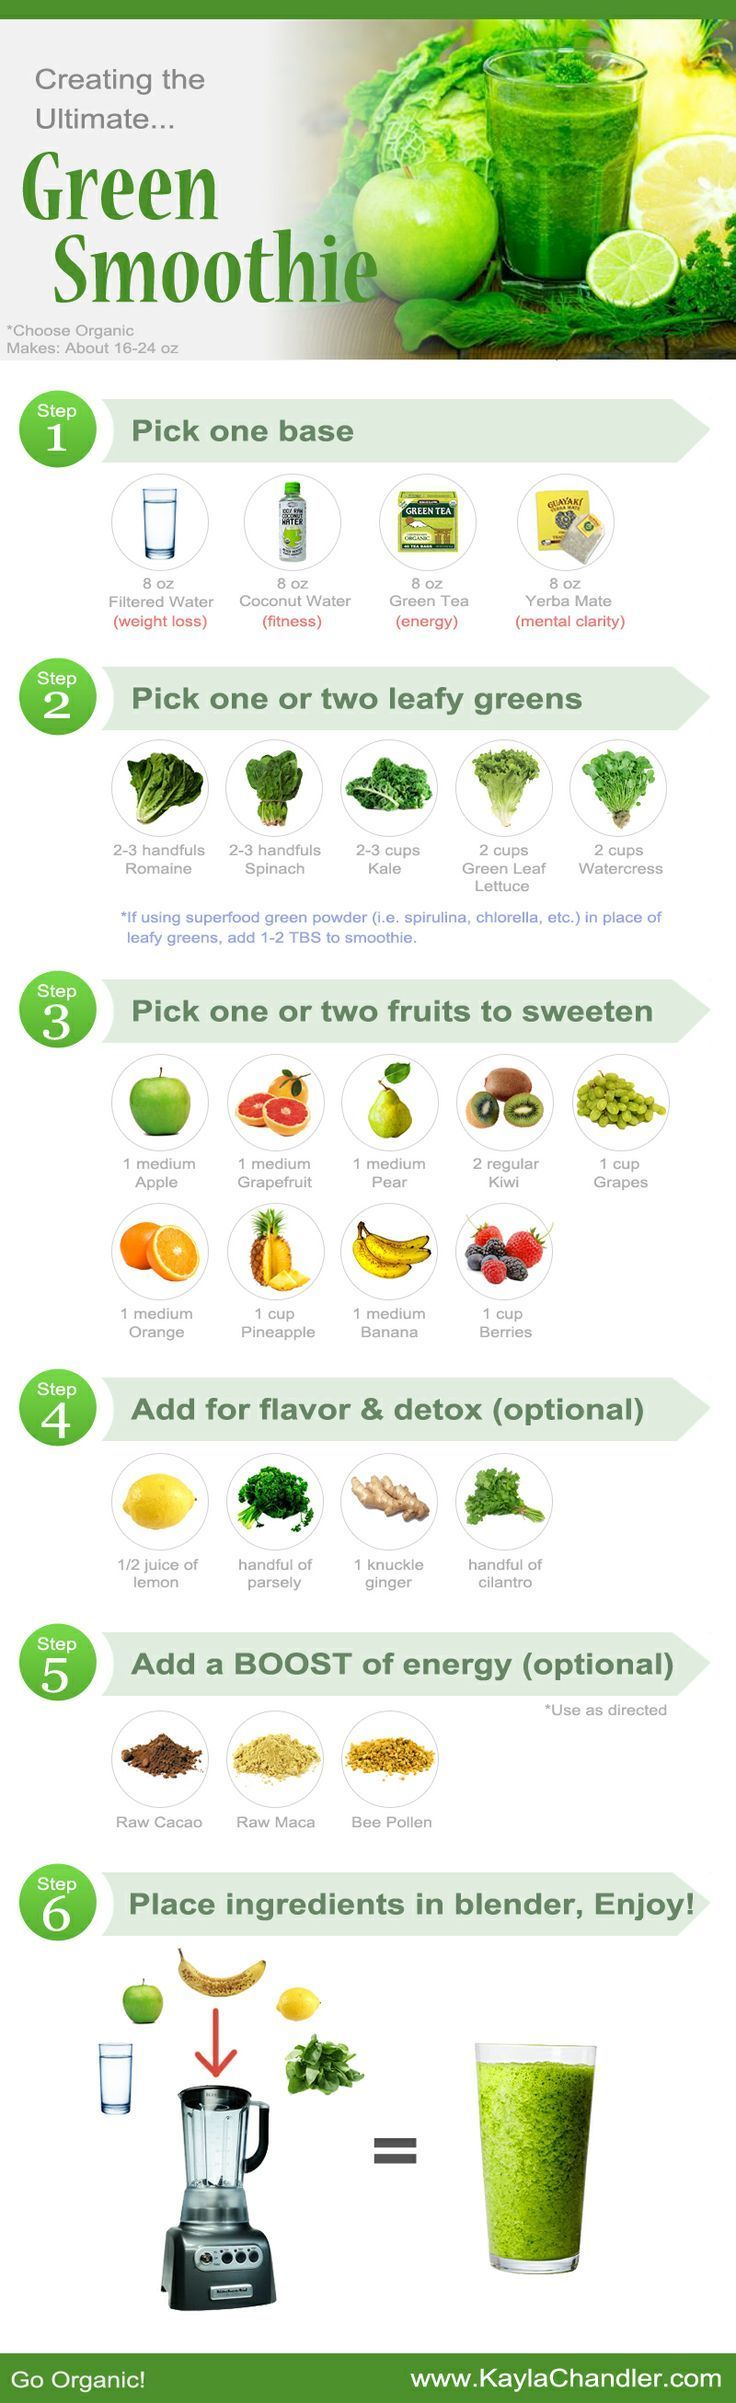 Guide to making the ultimate Green Smoothie for health, weight loss, and energy…